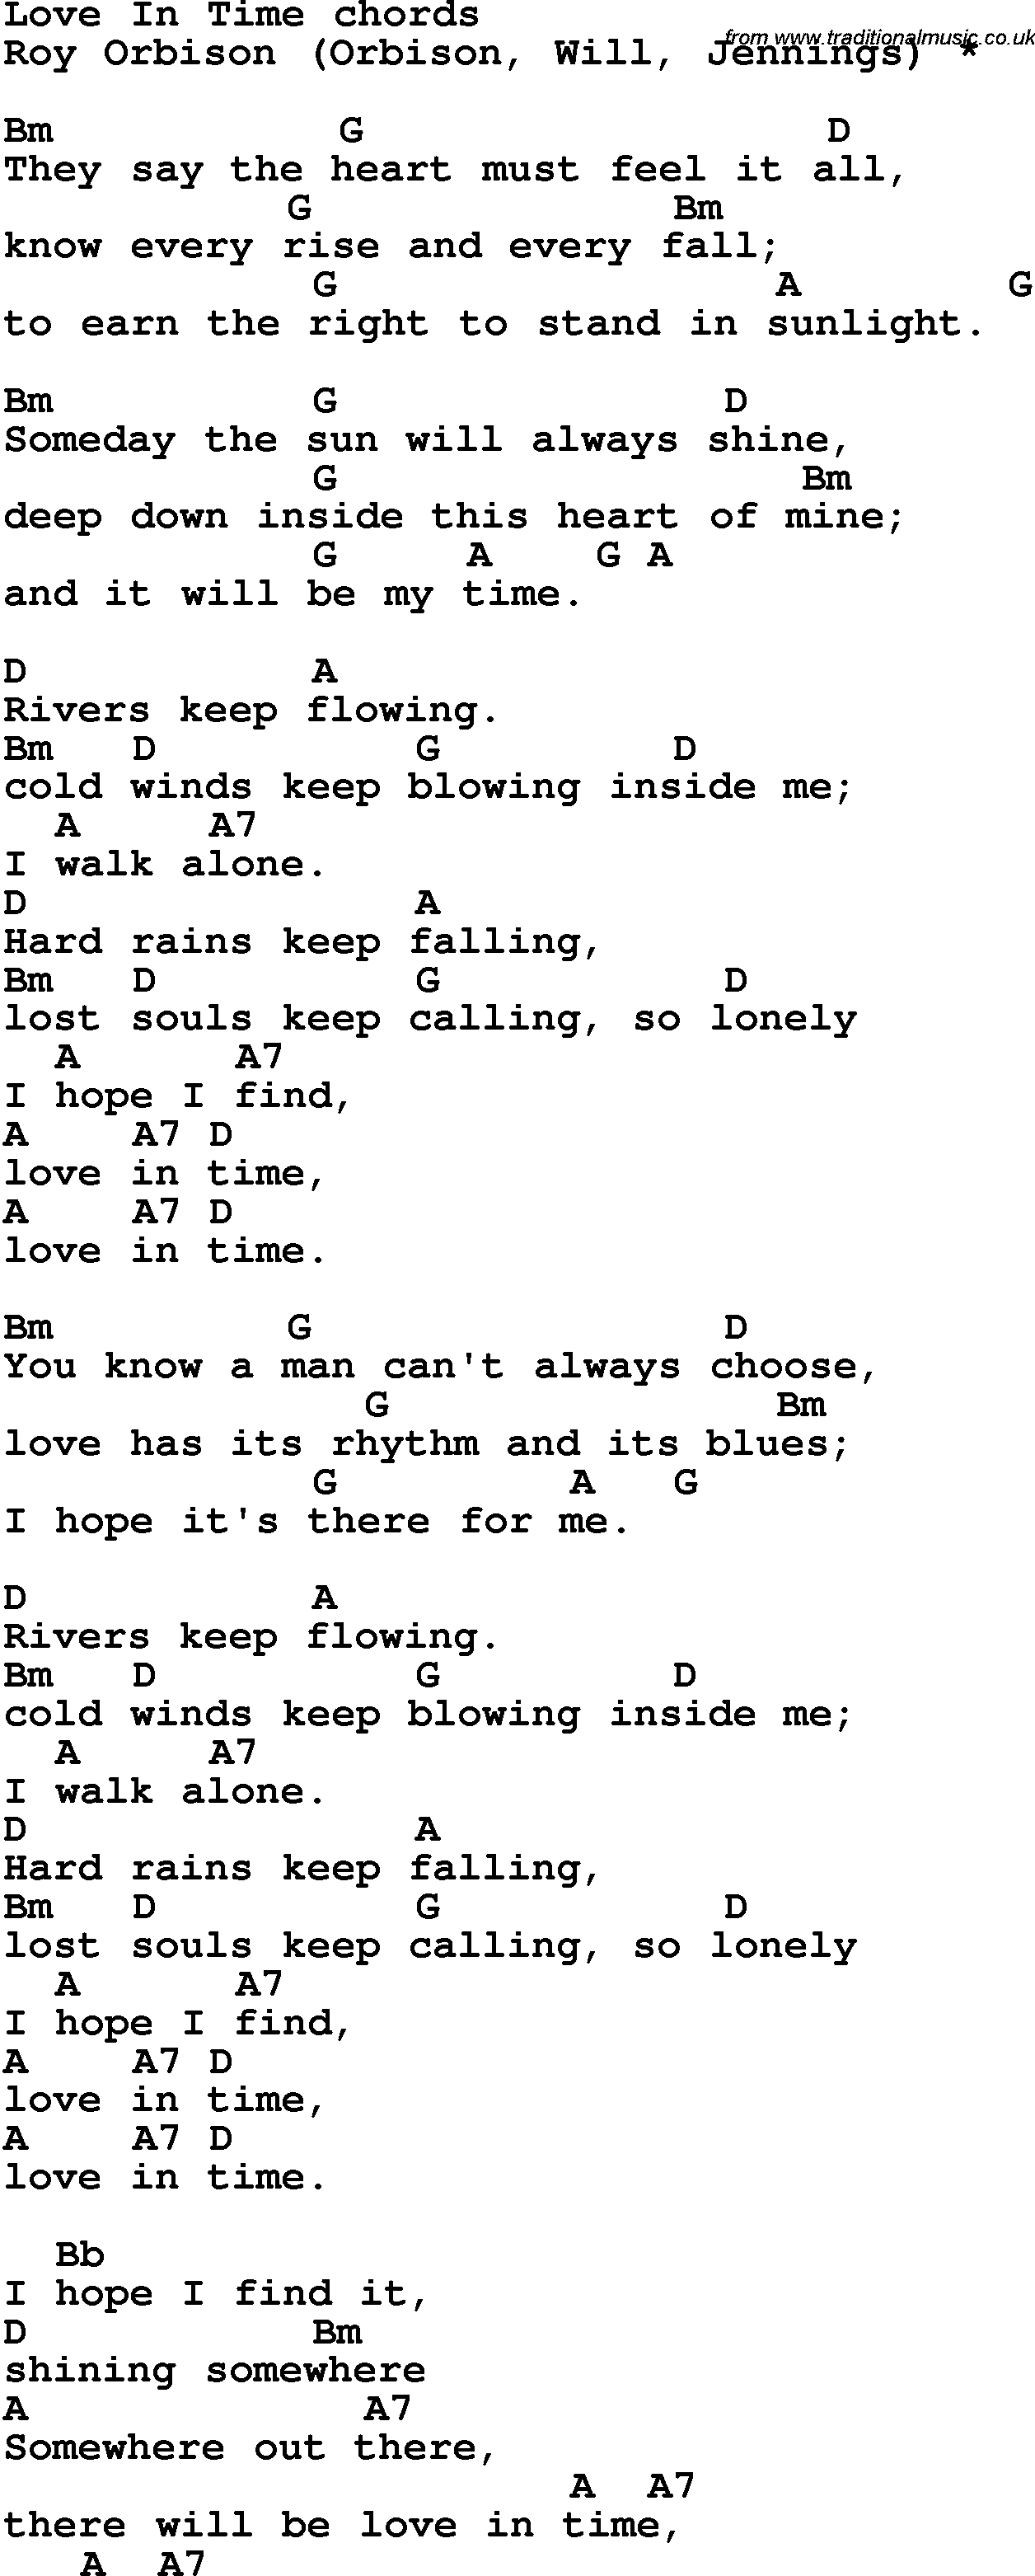 Song Lyrics with guitar chords for Love In Time